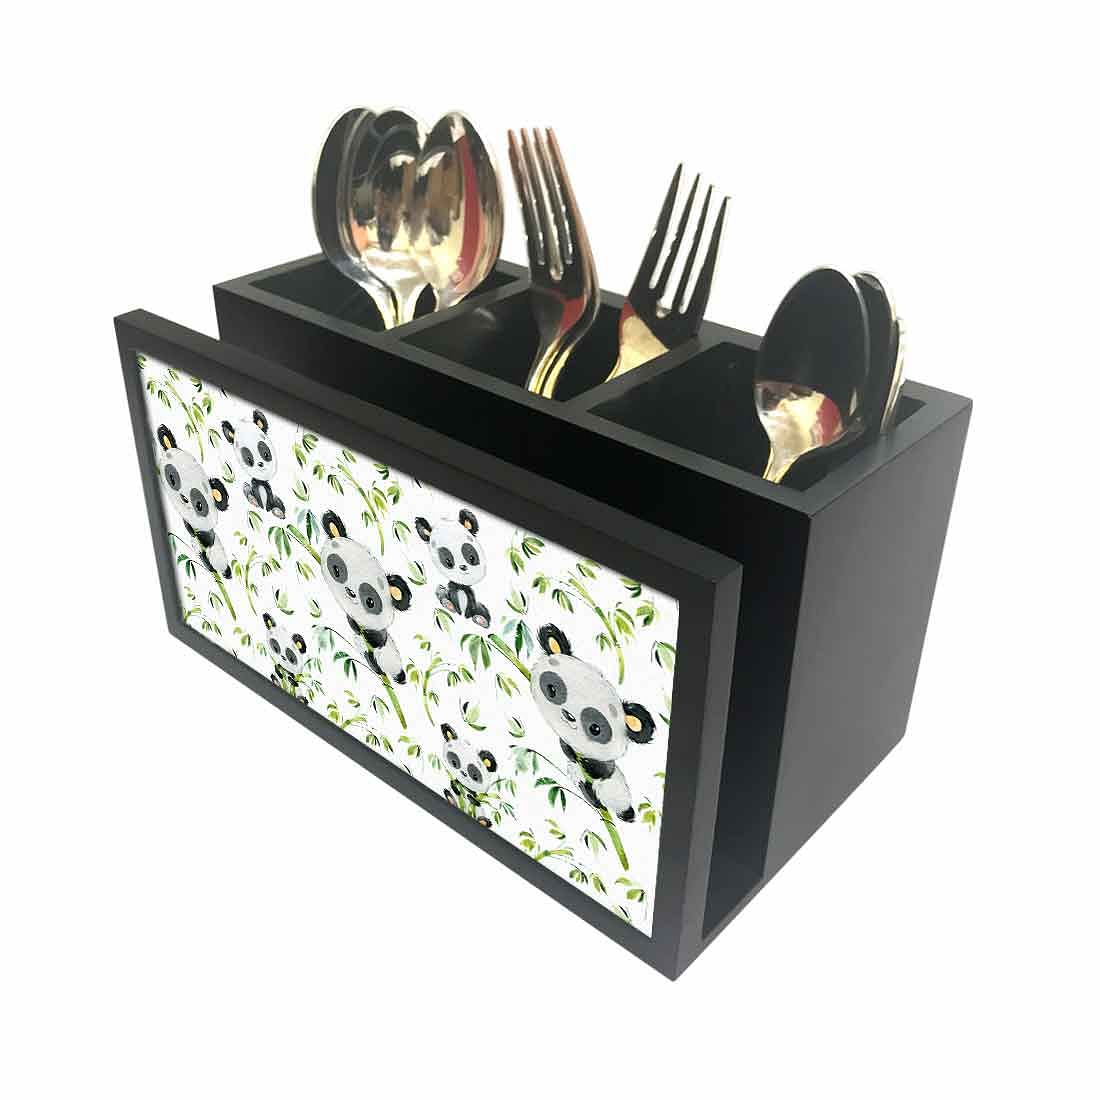 Nutcase Designer Cutlery Tissue Holder Stand Napkin Spoons Forks Knives Organizer - (CUTLERY NOT INCLUDED) -Made in India - Cute koala Nutcase